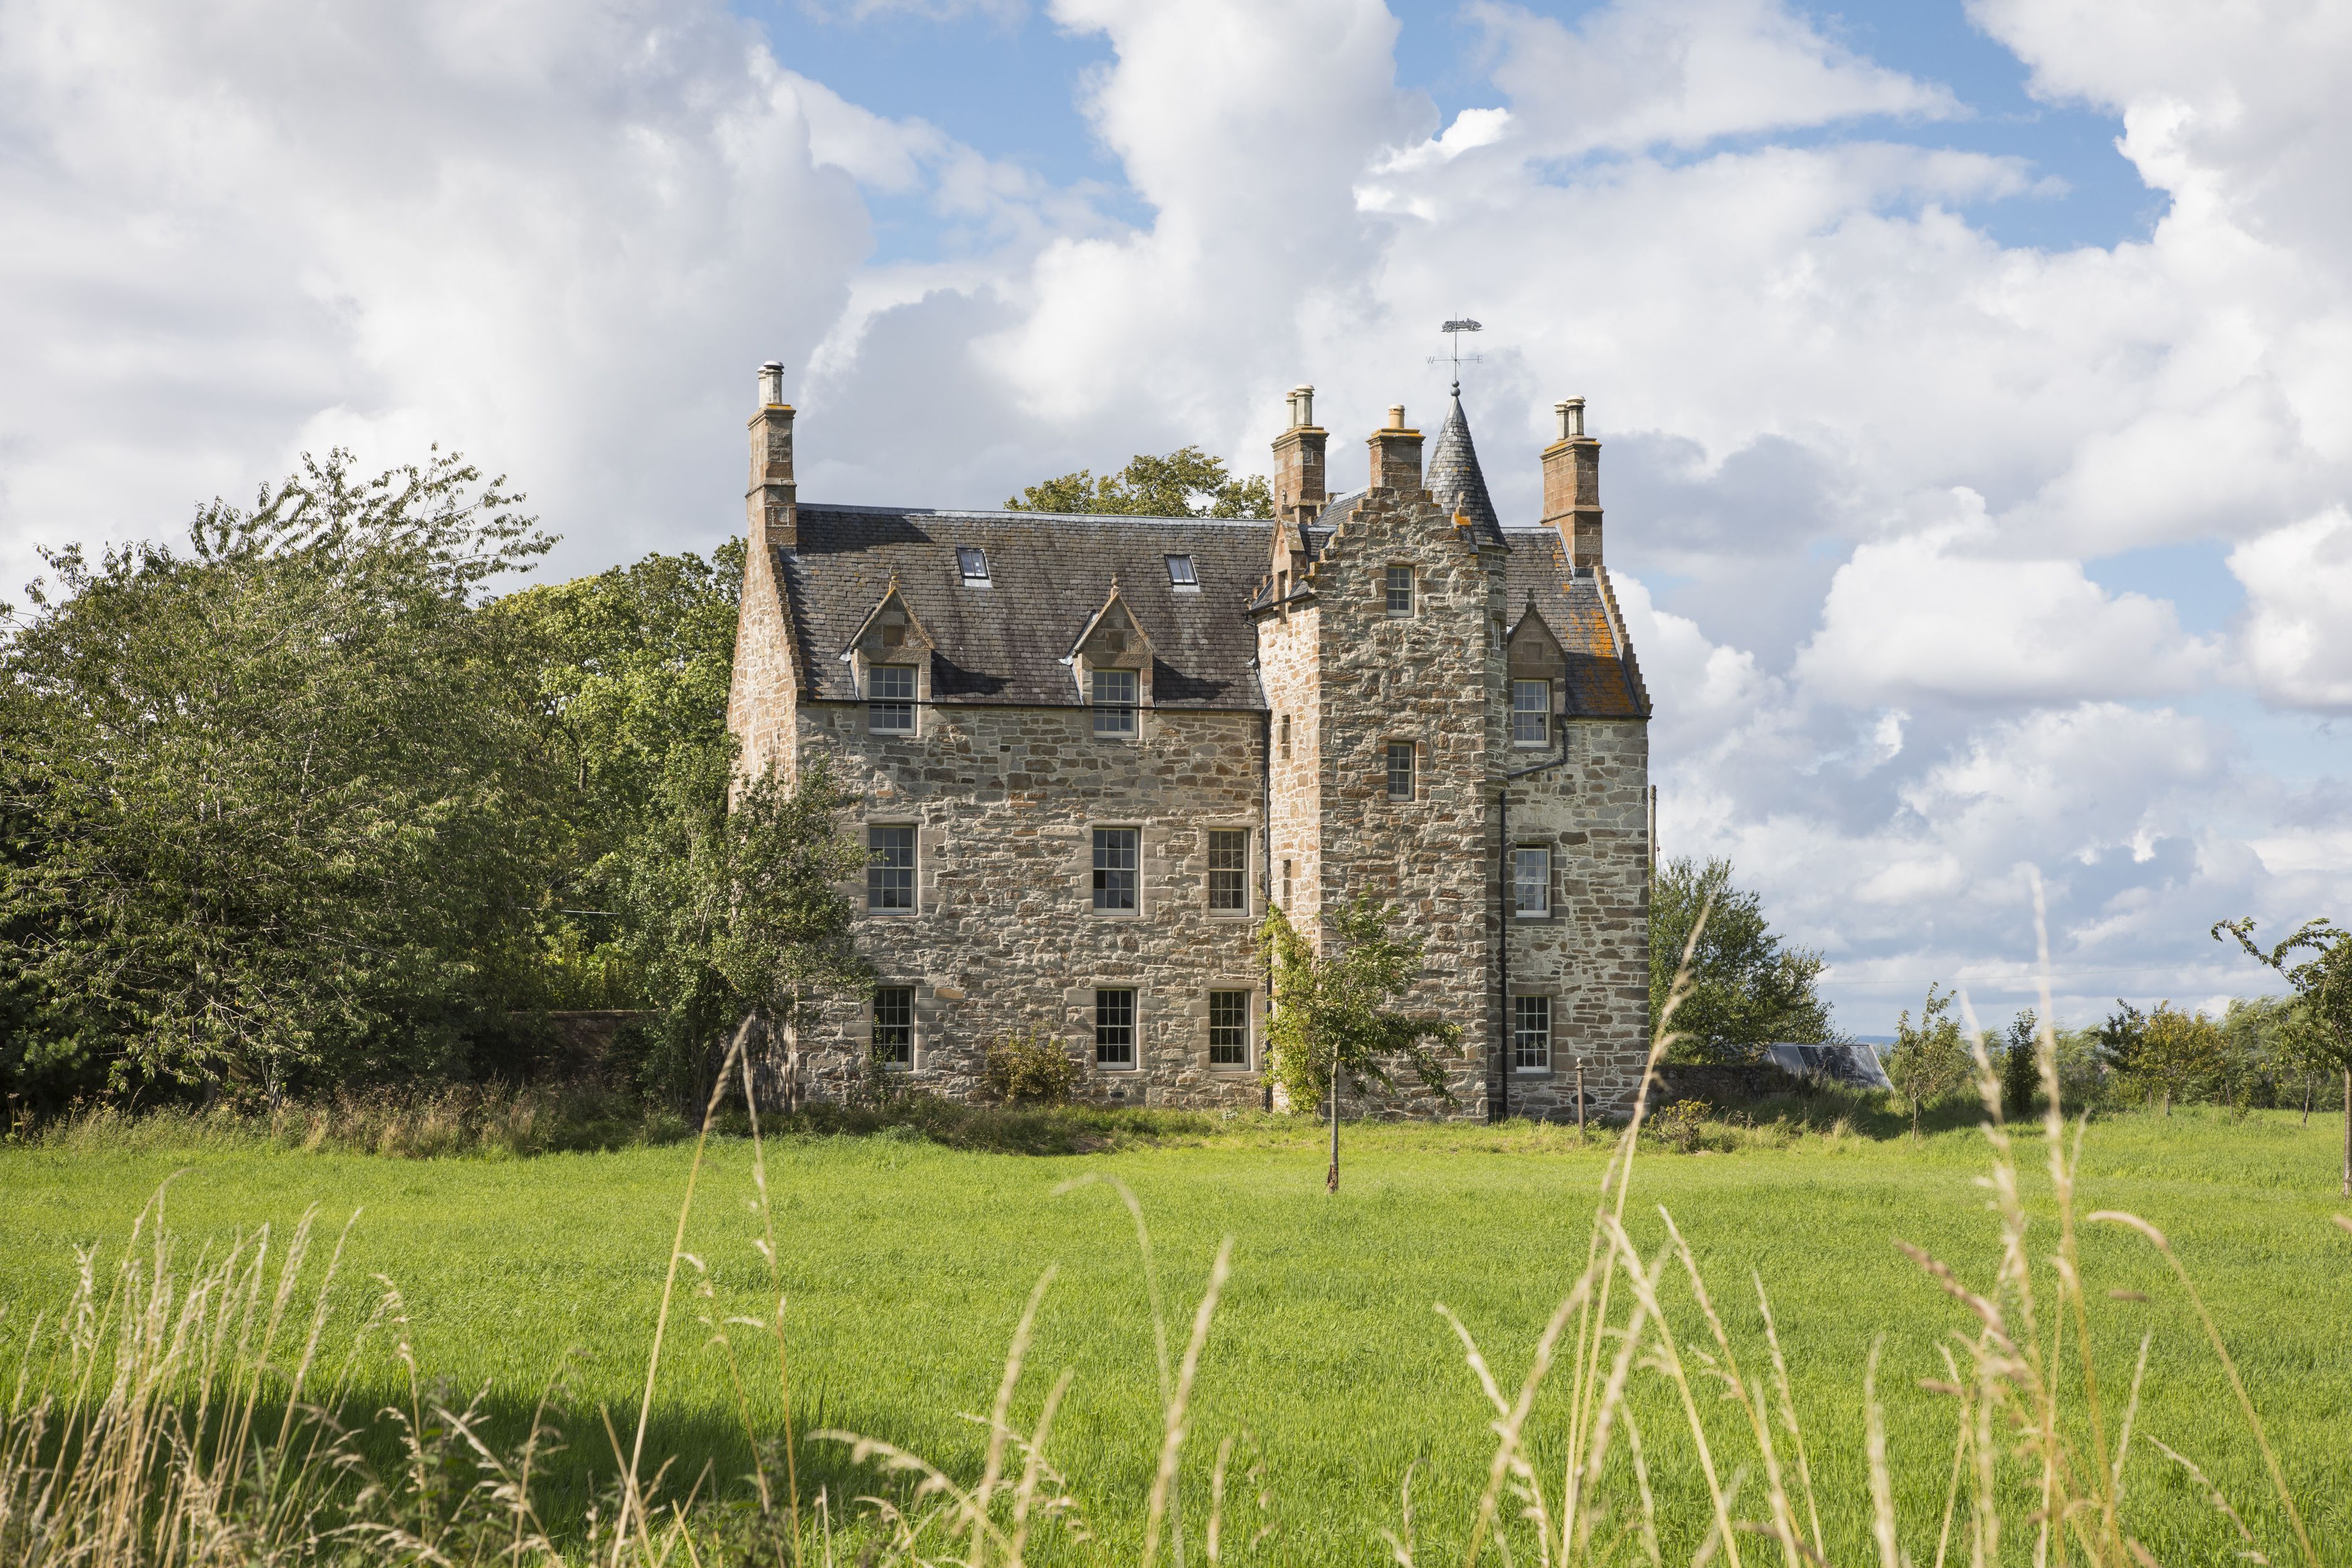 15th Century Scottish Castle For Sale Has A Very Royal History ...